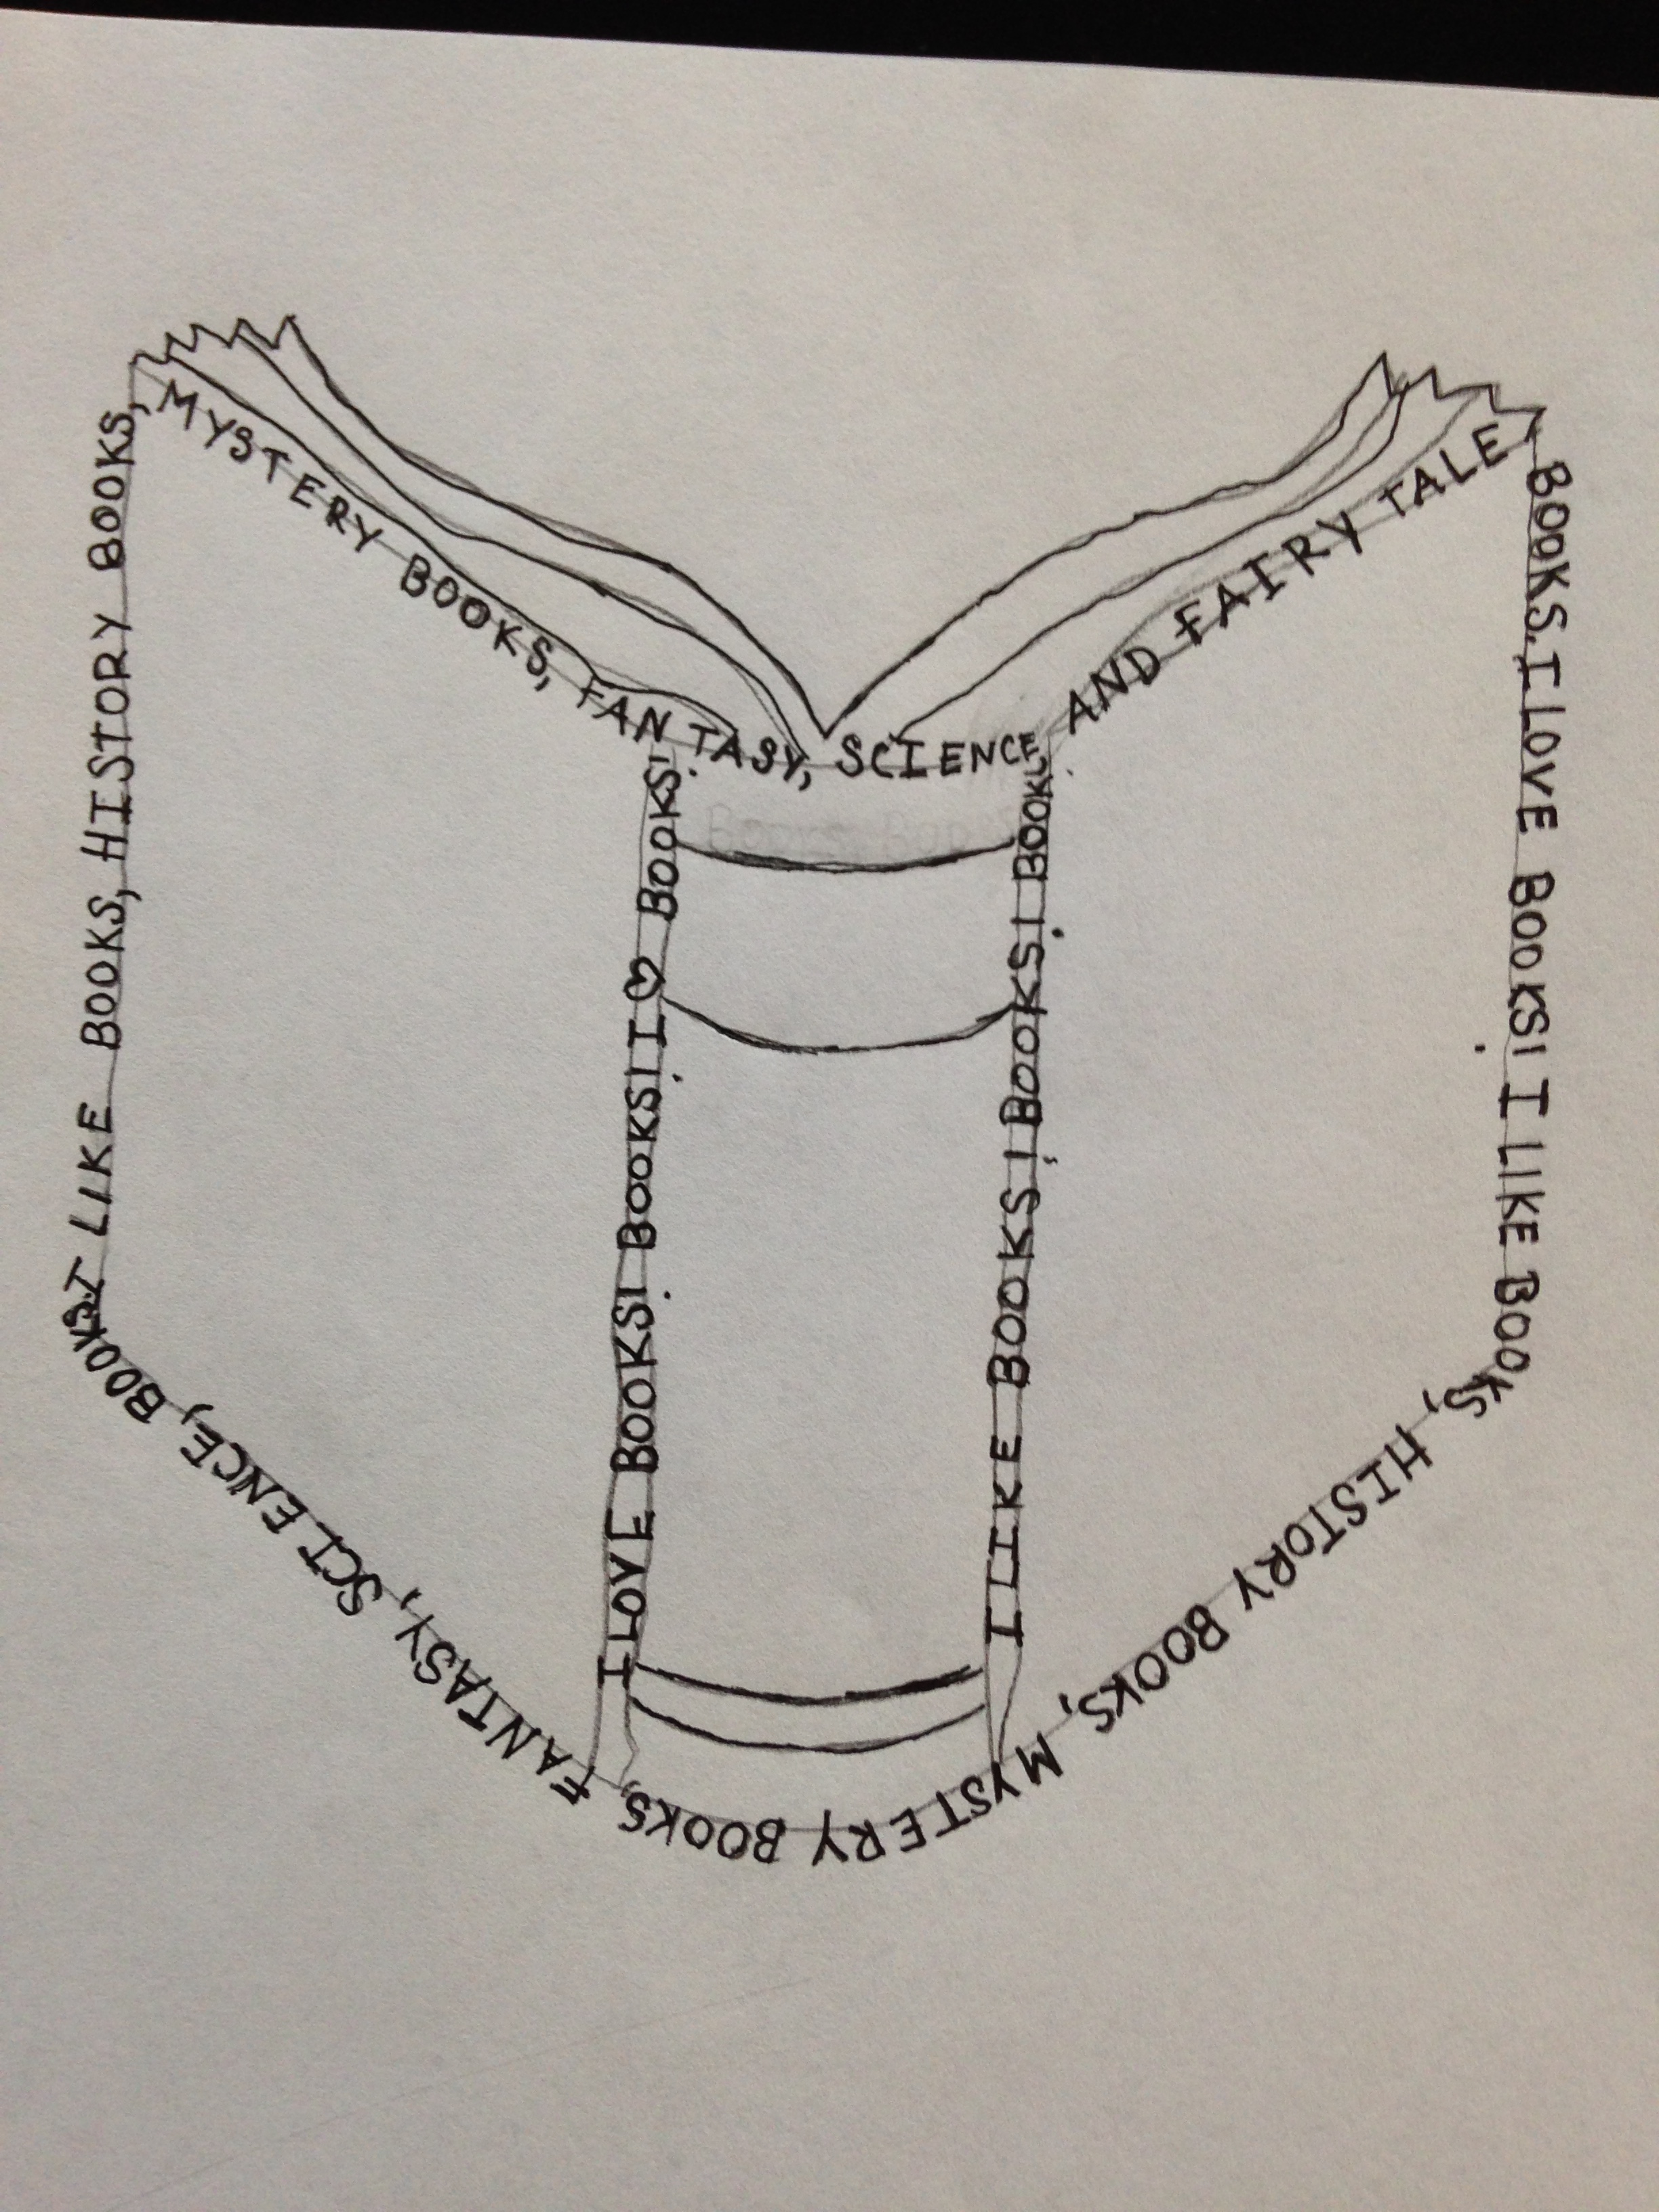 Concrete Poems and Shape Poetry | TheRoomMom